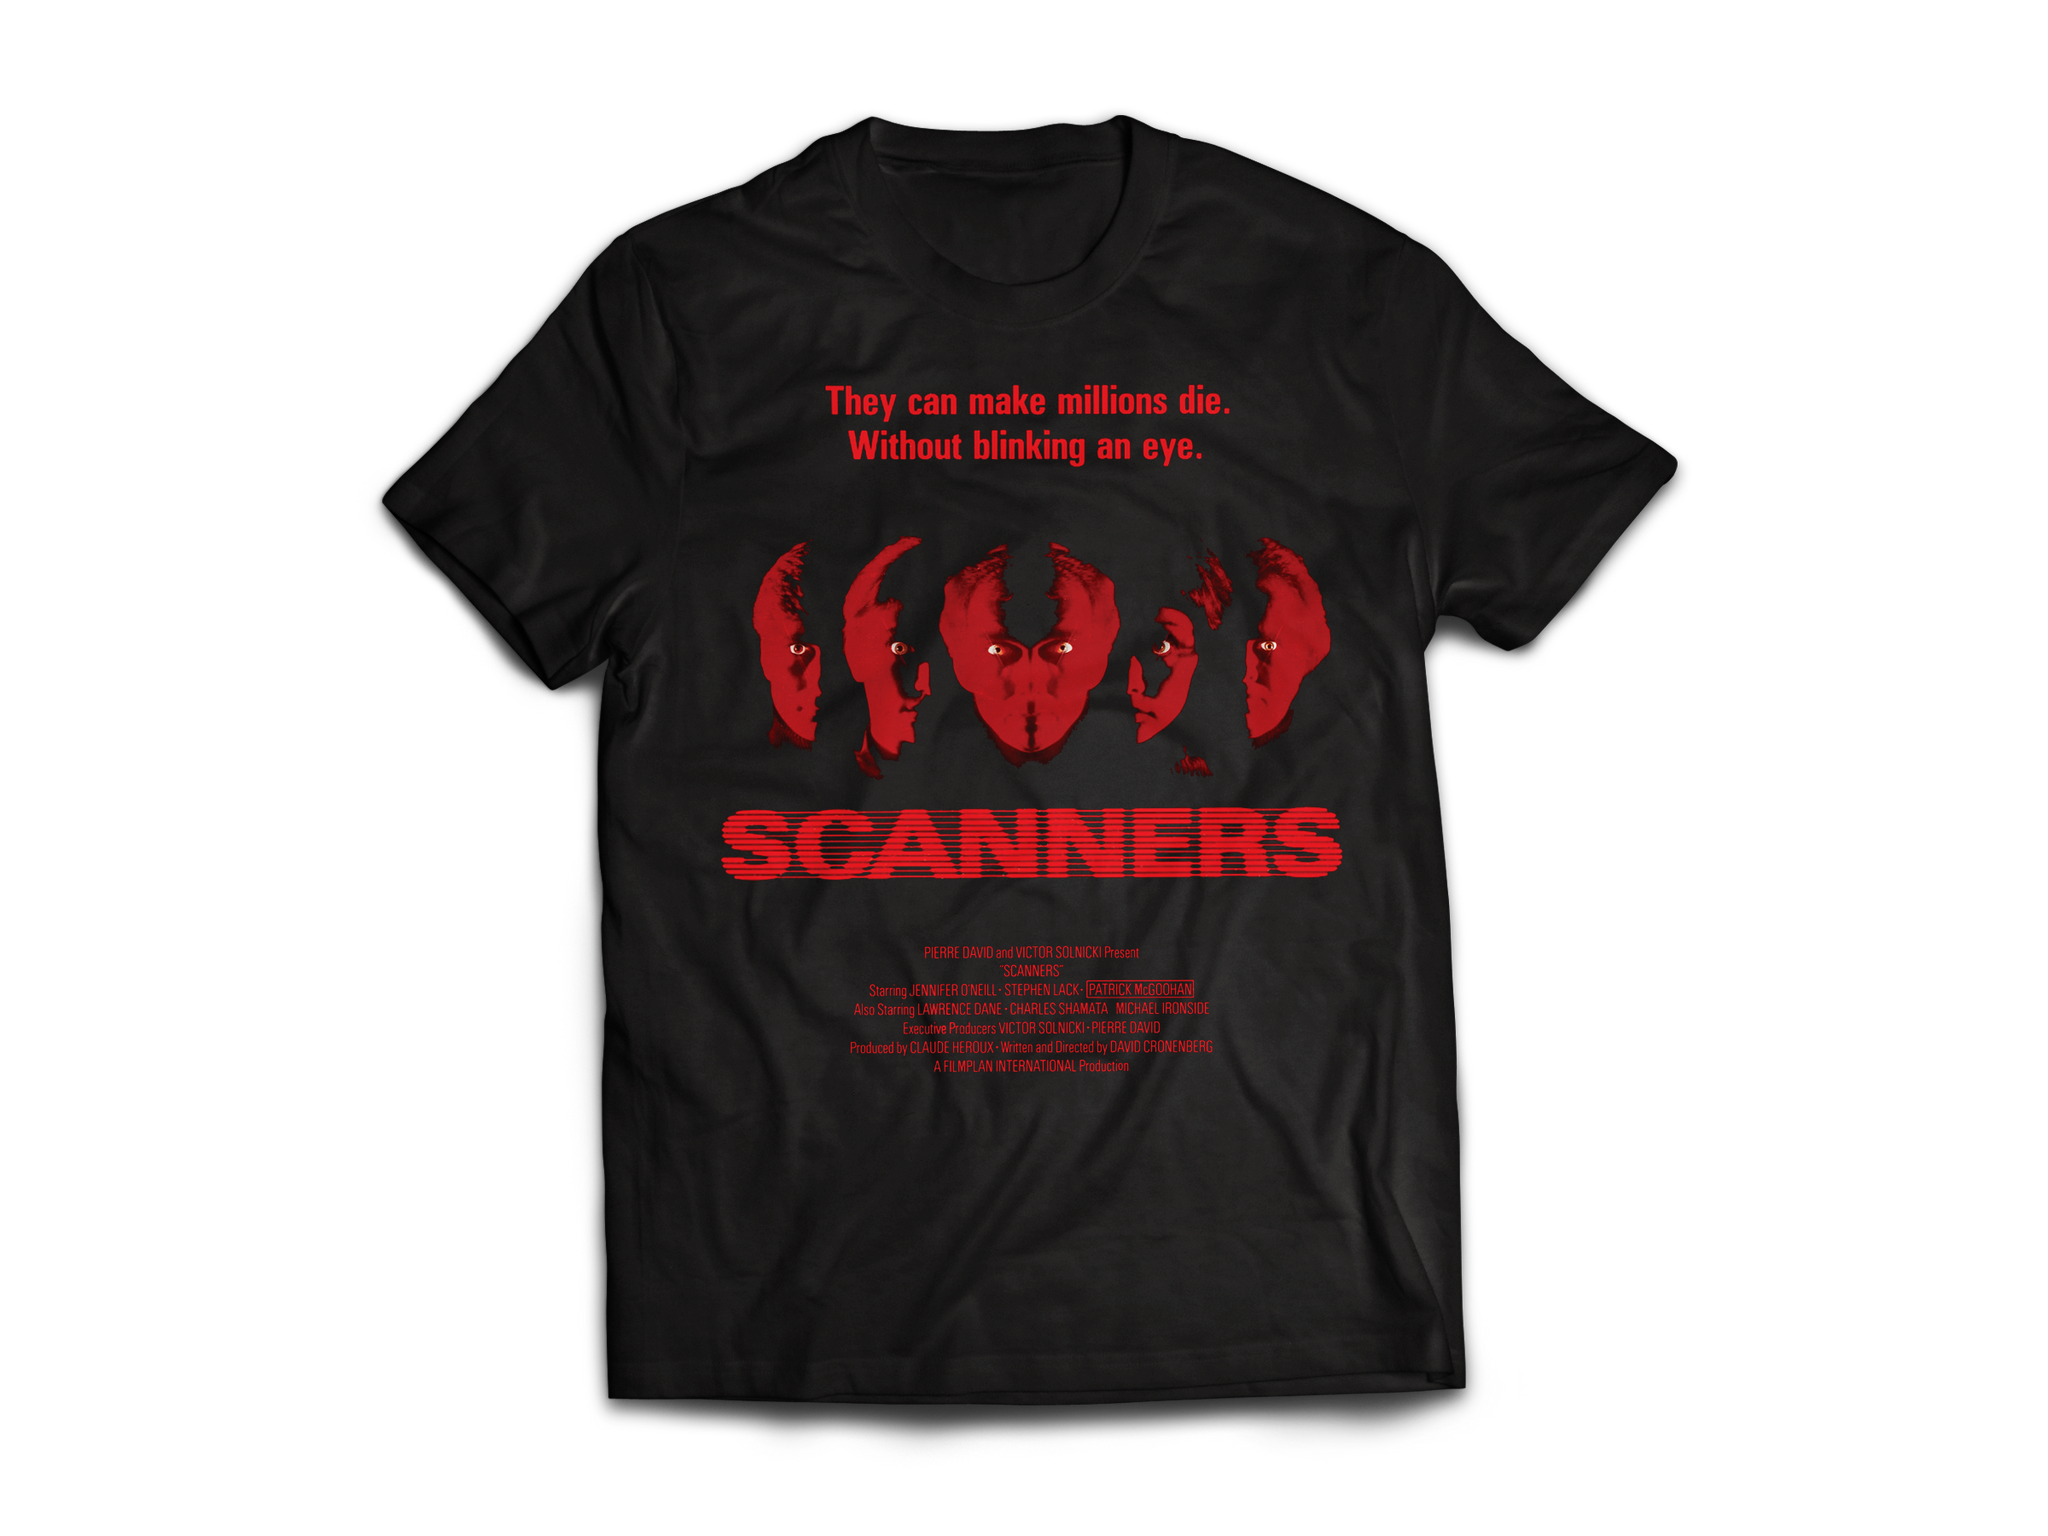 SCANNERS "THEY CAN MAKE MILLIONS DIE" T-SHIRT